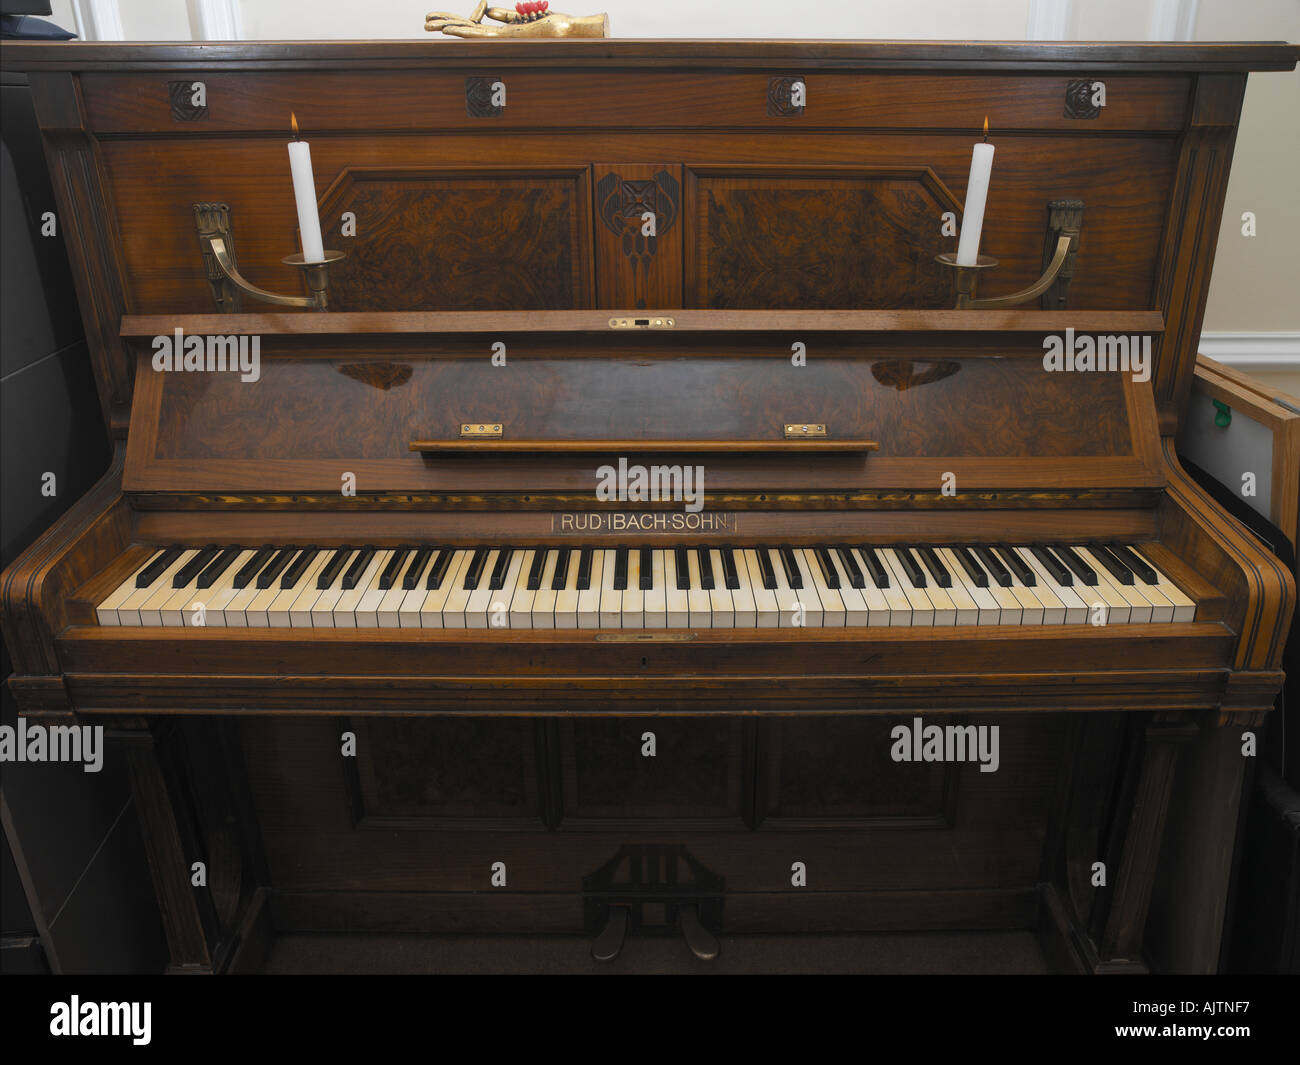 Upright Piano Keys High Resolution Stock Photography and Images - Alamy